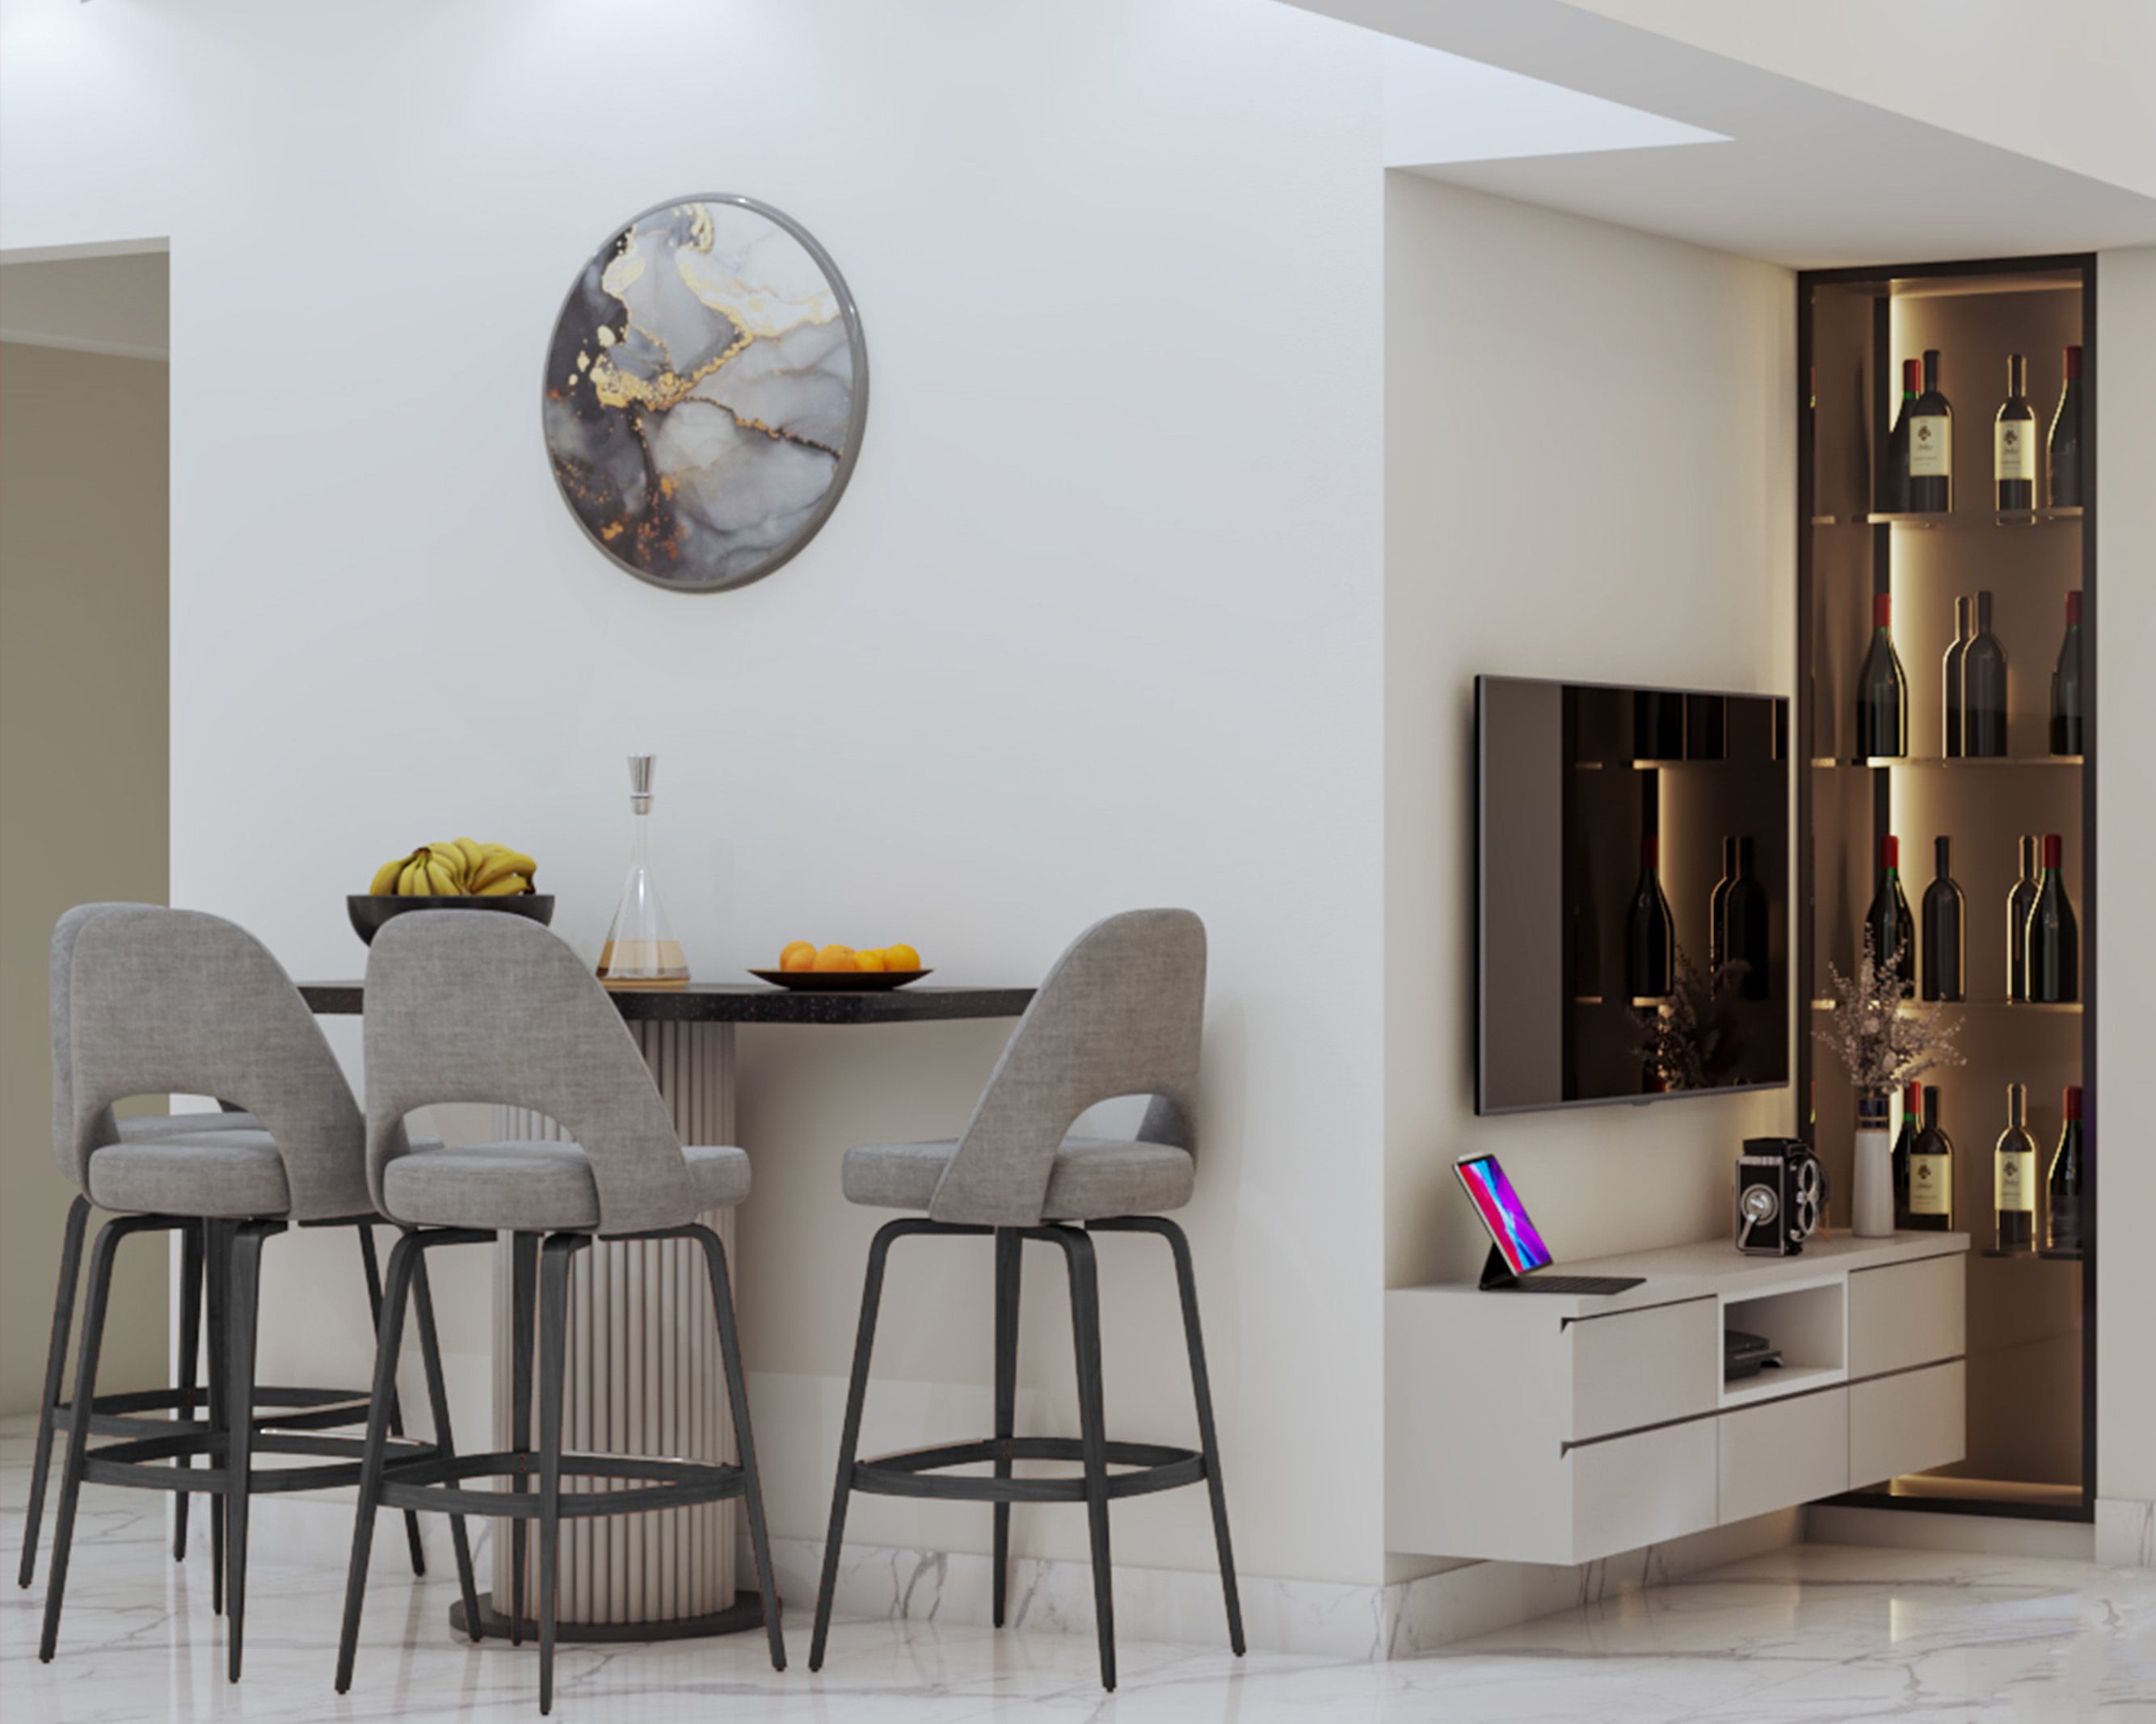 Contemporary 4-Seater Dining Room Design With Grey High Chairs